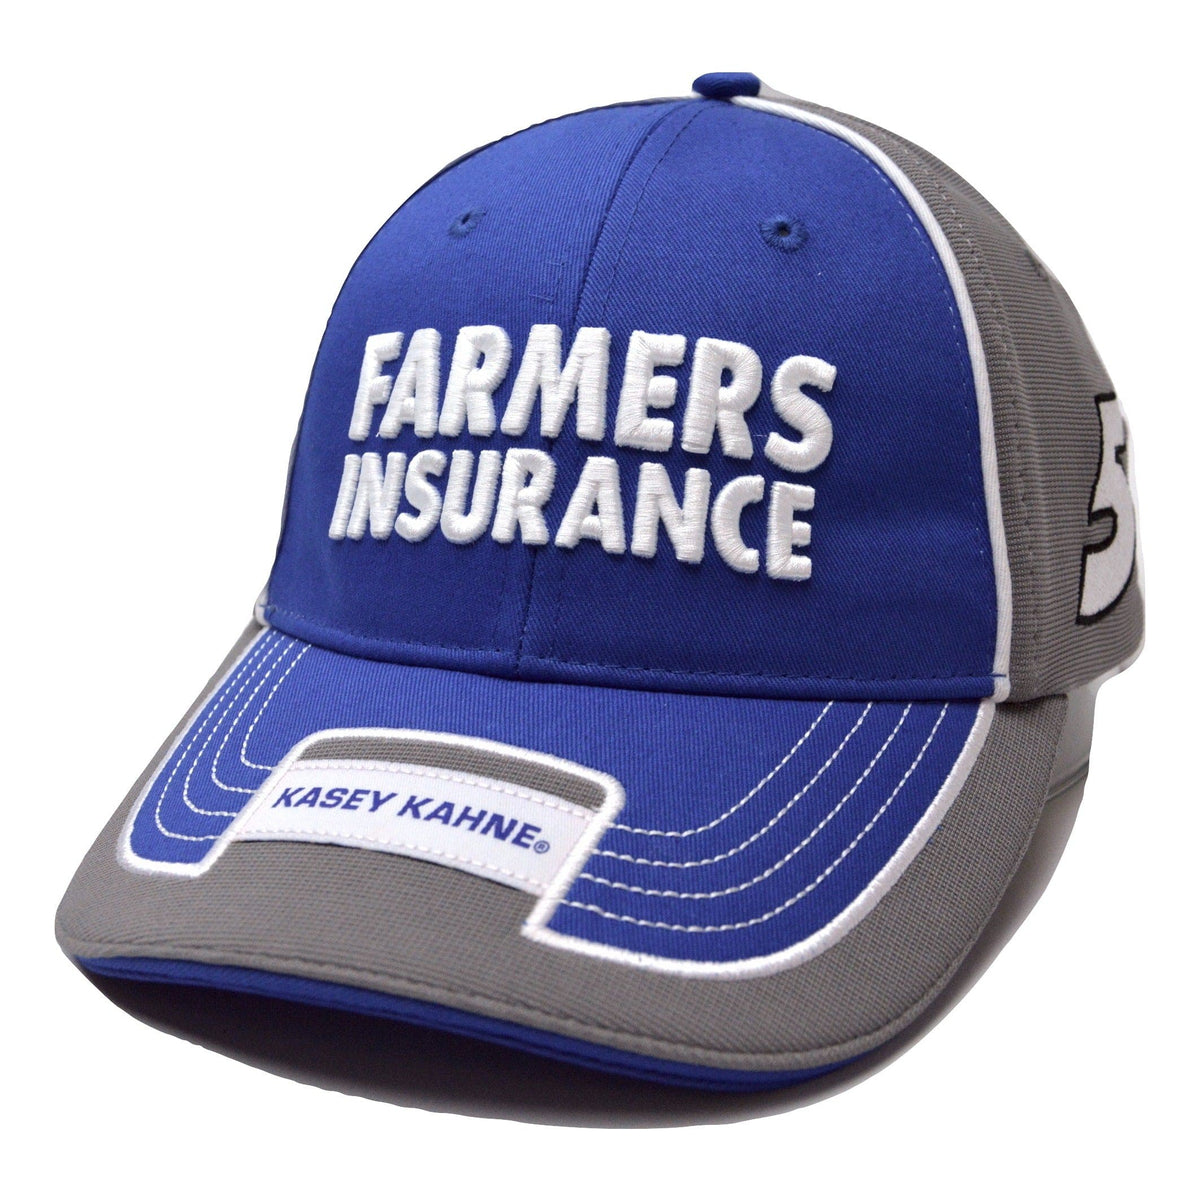 Kasey Kahne #5 Farmers Insurance NASCAR Adrenaline Adjustable Racing Cap Right Front View